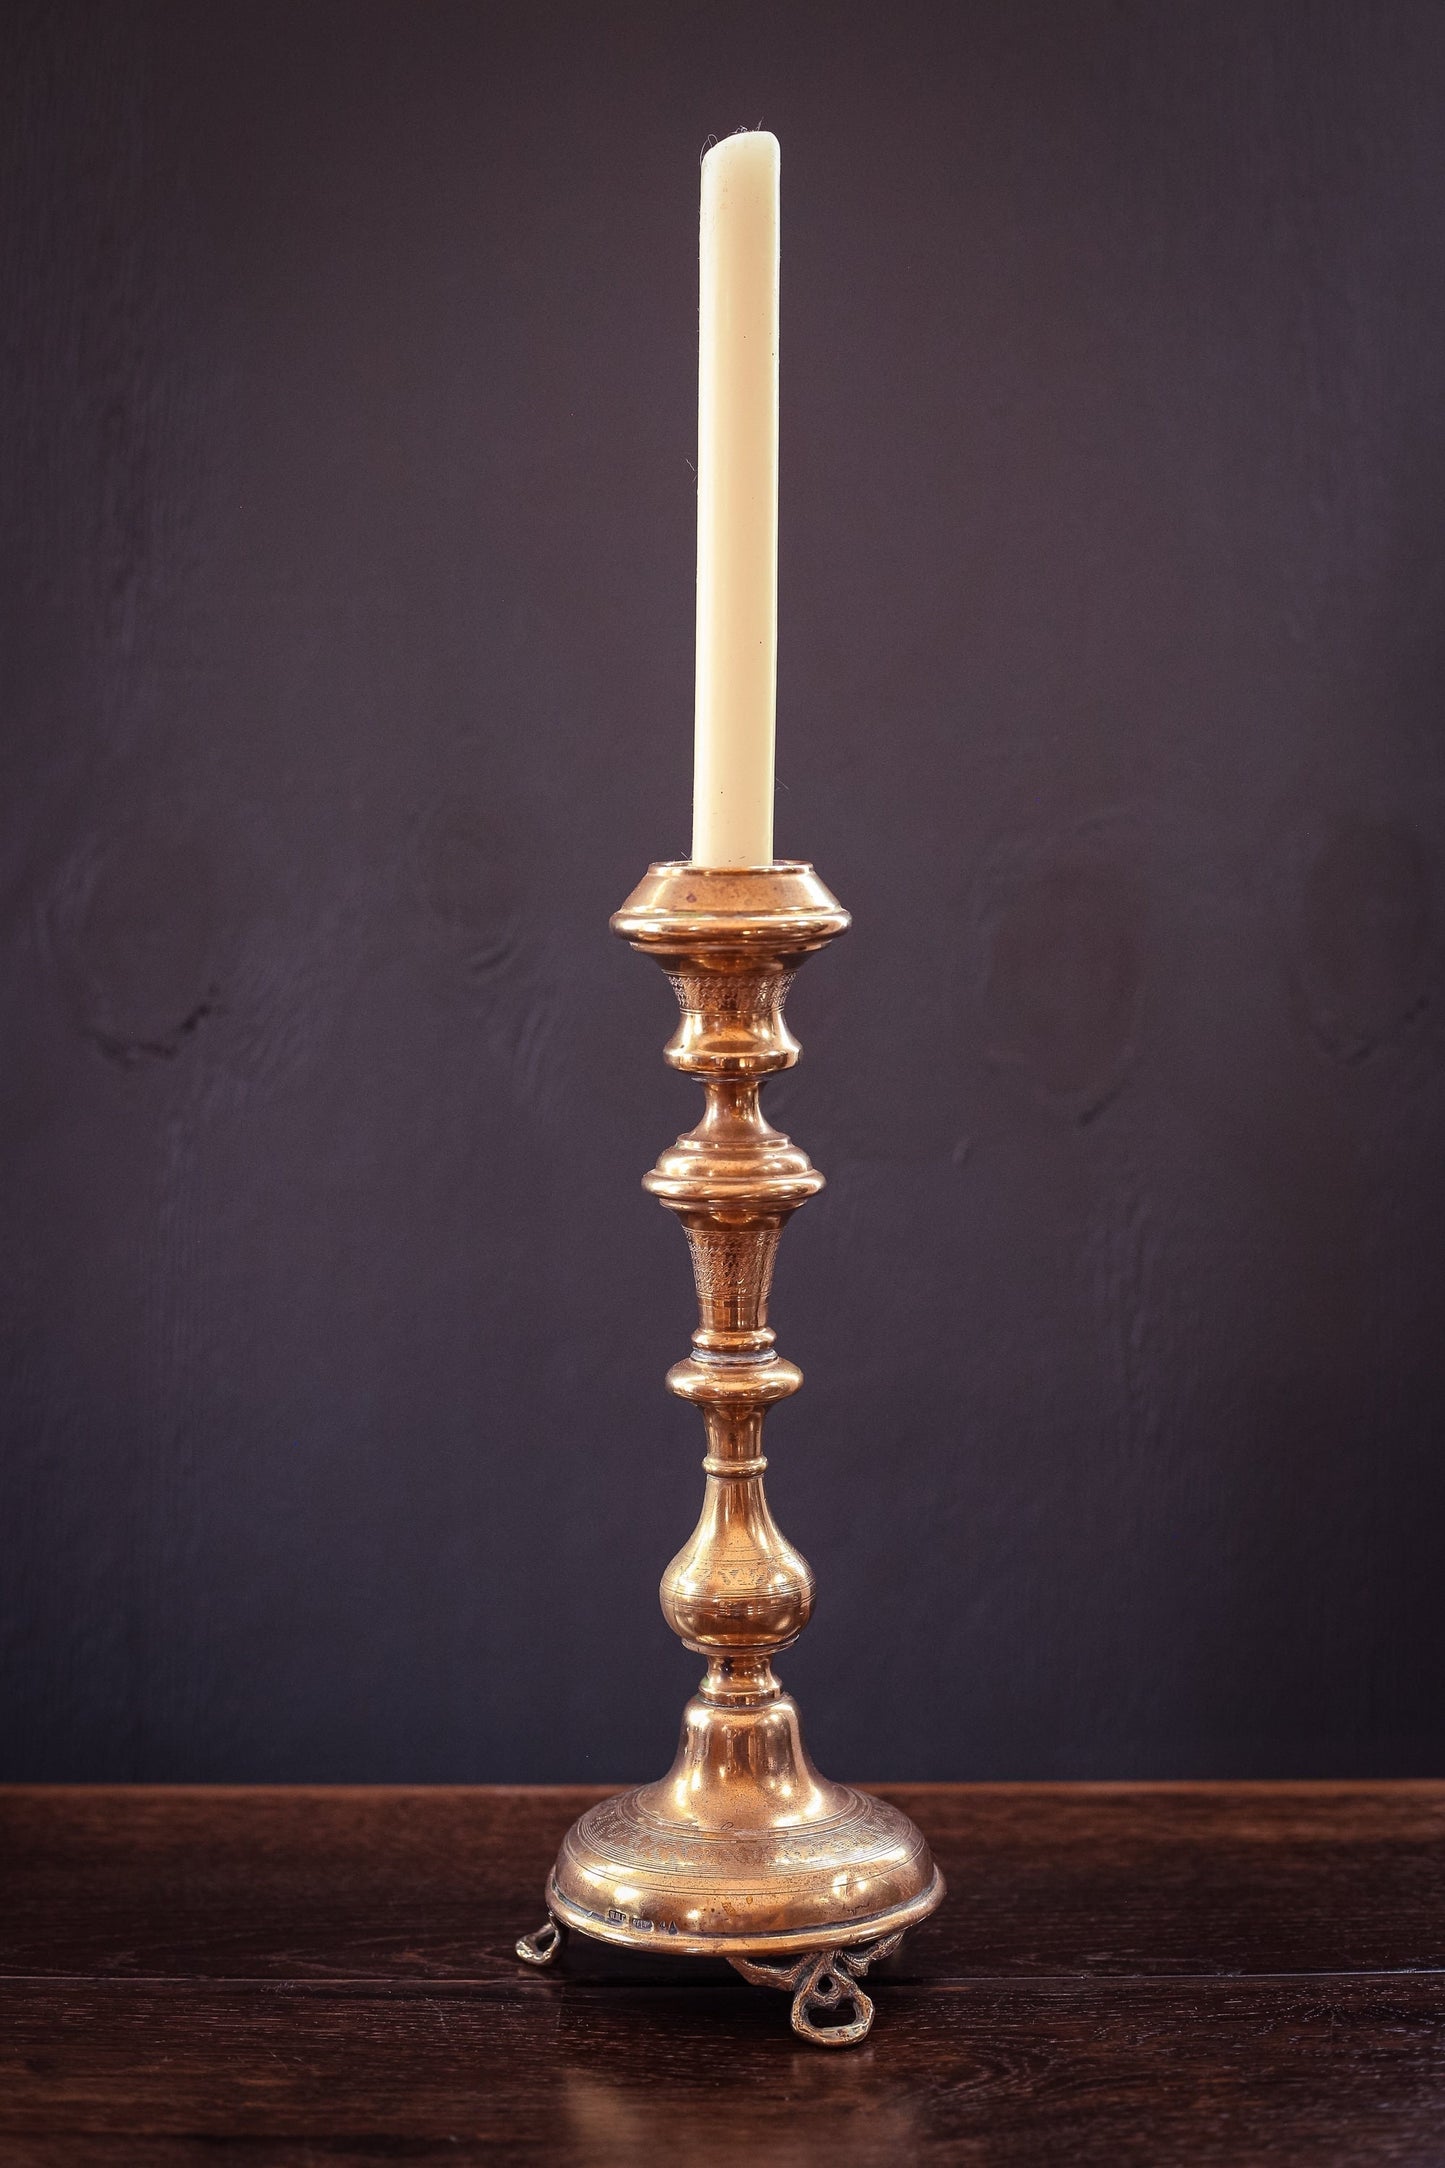 Tall Brass Engraved Candlestick Holder with Decorative Feet - Vintage Brass Candle Base